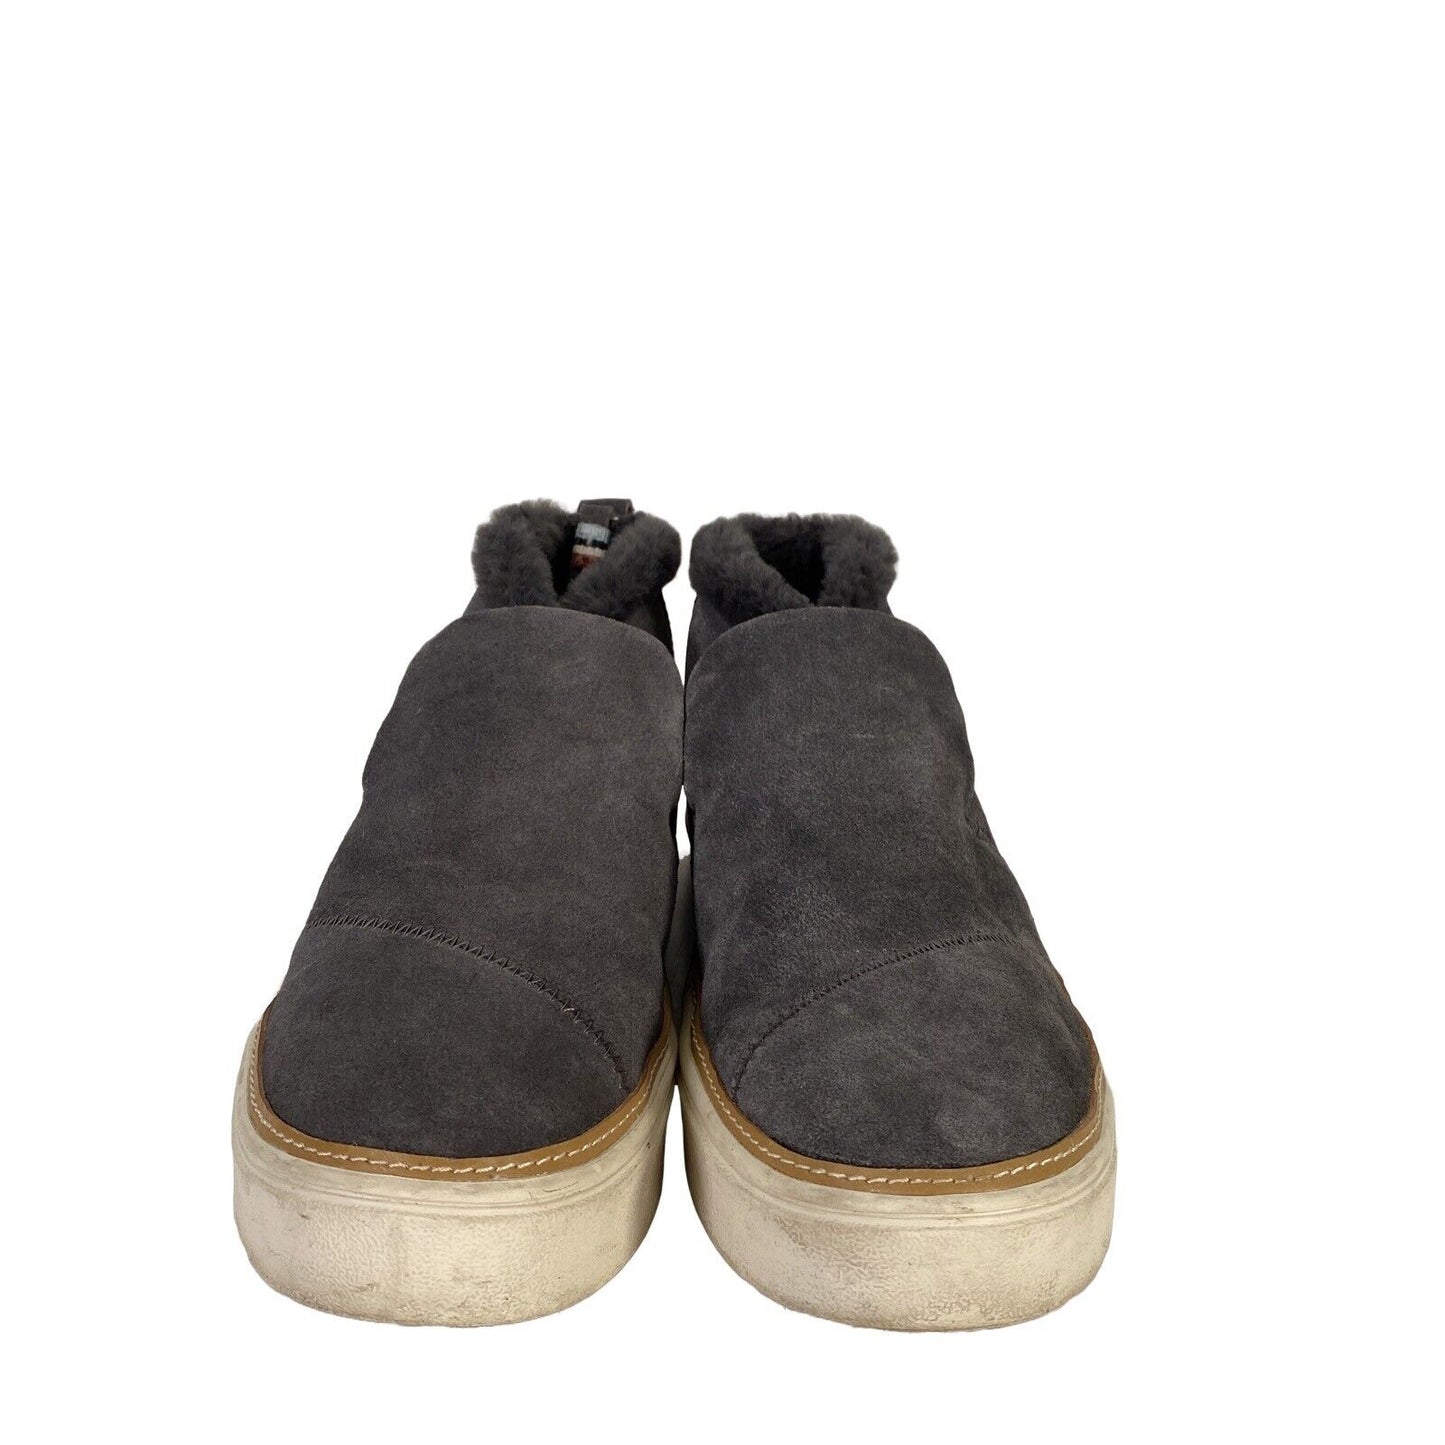 Toms Women's Gray Paxton Suede Slip On Ankle Booties - 8